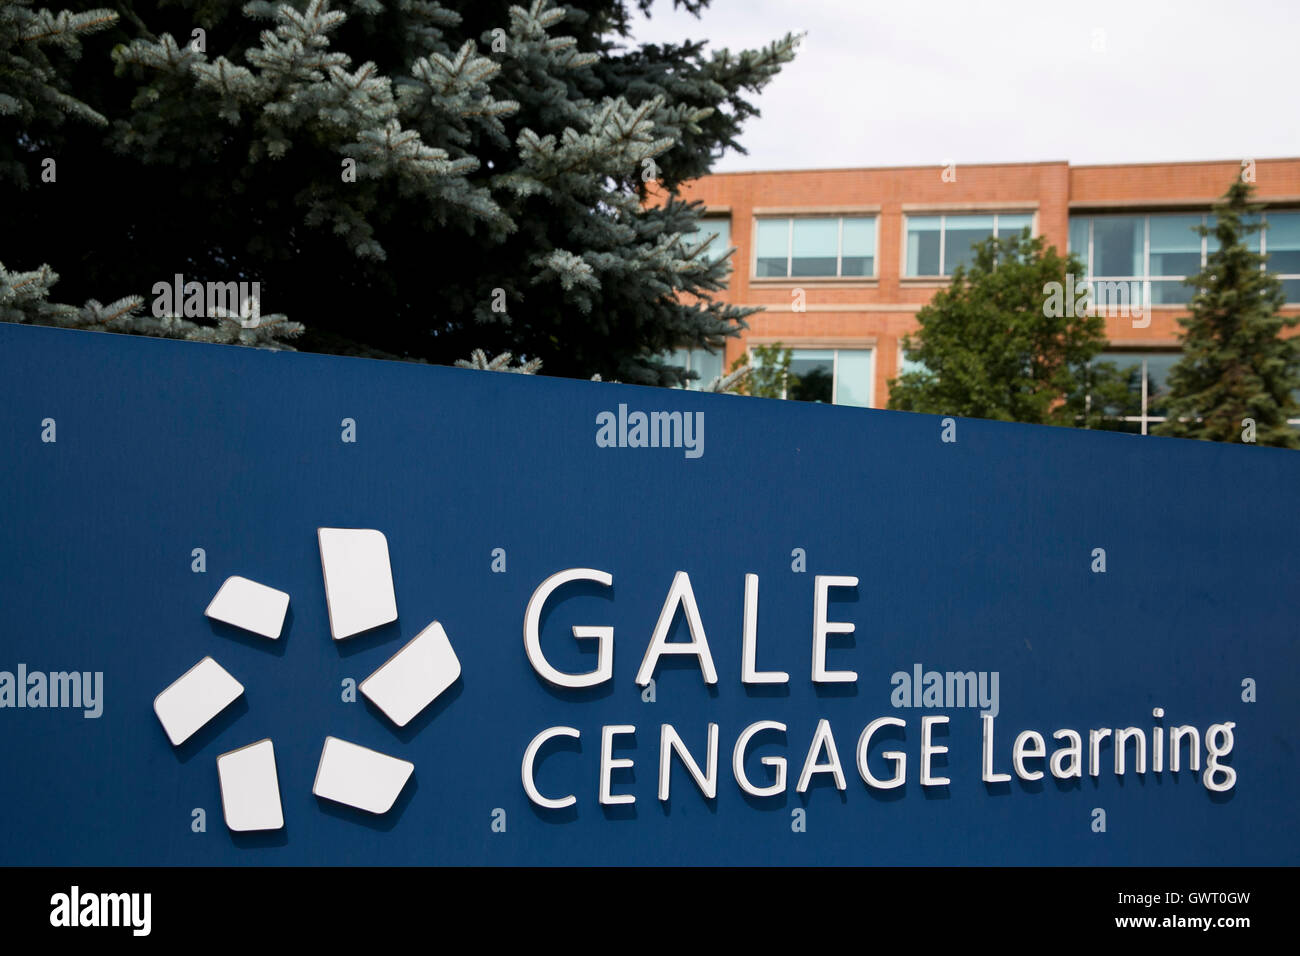 A logo sign outside of the headquarters of Gale, a subsidiary of Cengage Learning, in Farmington Hills, Michigan on July 17, 201 Stock Photo